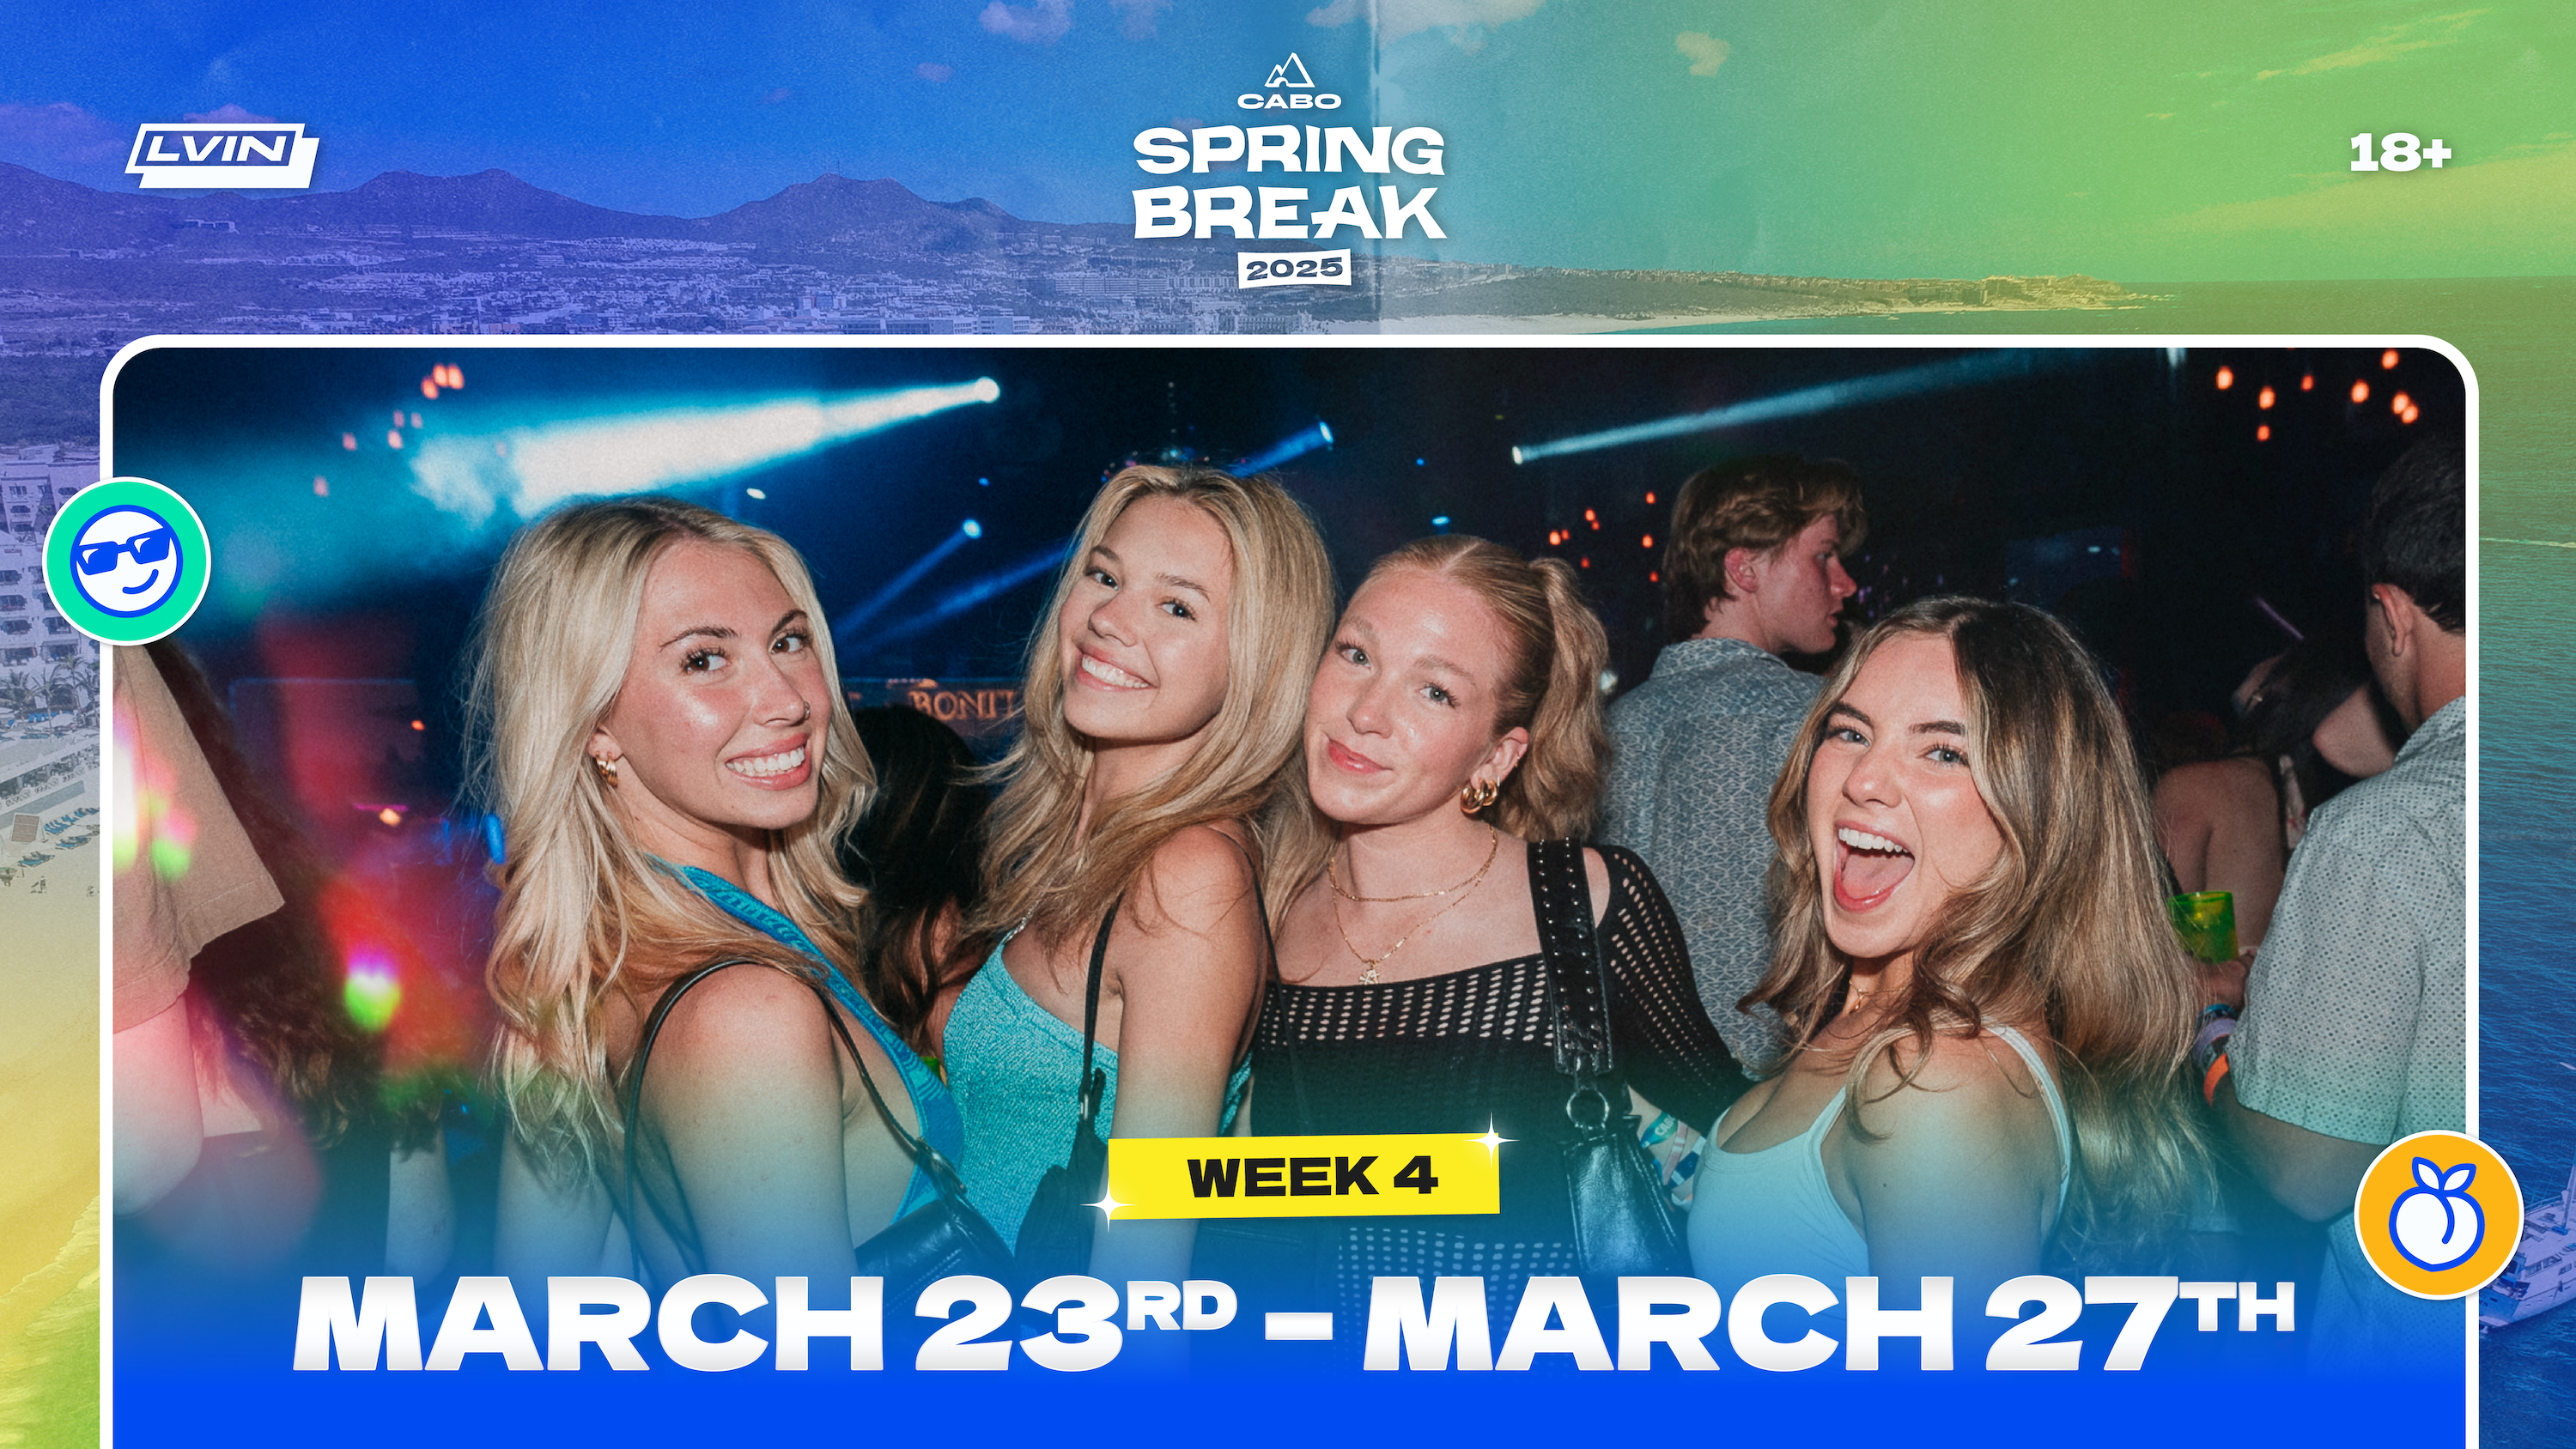 Cabo Spring Break 2025 Week 4 Header March 23 to March 27 LVIN